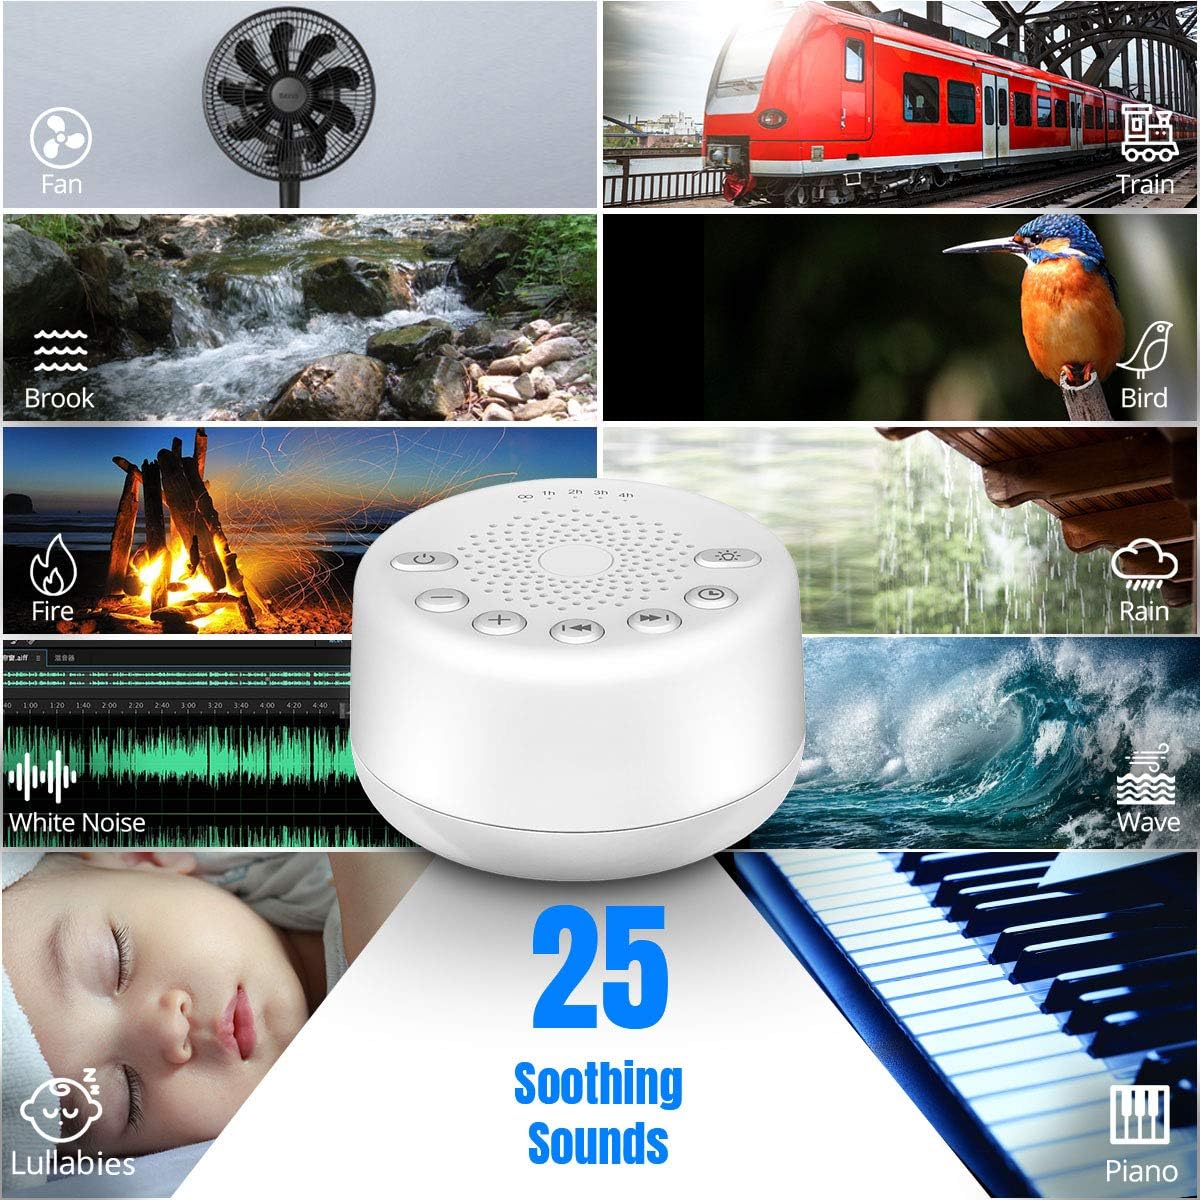 Easysleep Sound White Noise Machine with 25 Soothing Sounds and Night Lights with Memory Function 32 Levels of Volume and 5 Sleep Timer Powered by AC or USB for Sleeping Relaxation-Stumbit Kids